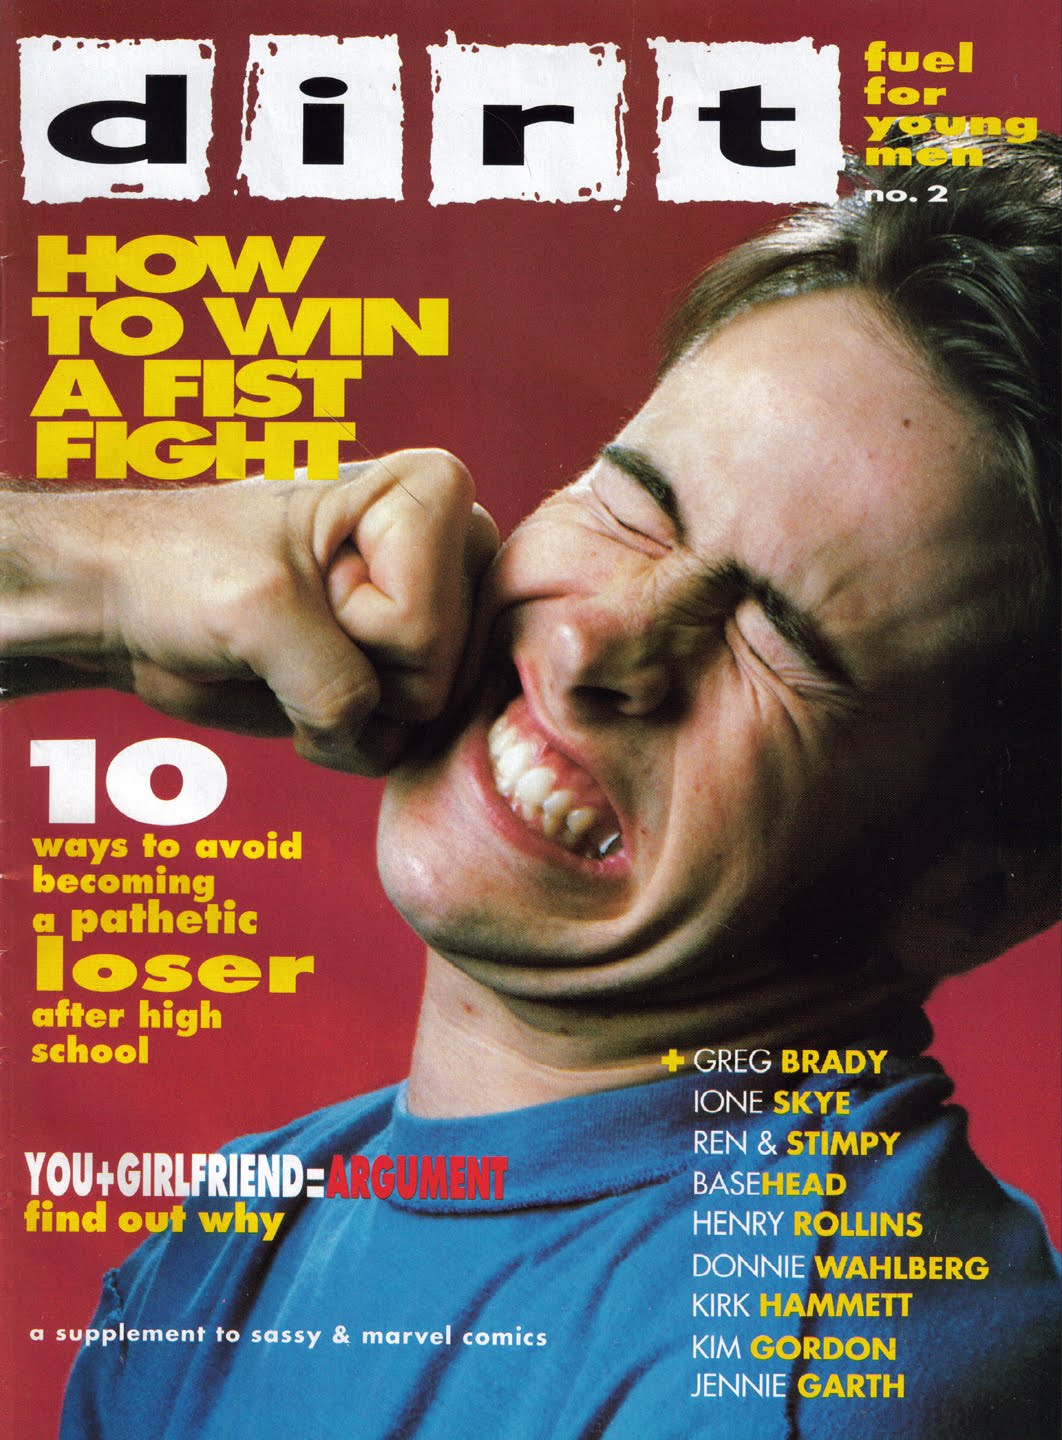 PC Magazine 1991 год. Dirty Magazine. Dirty Magazine Cover. Henry Rollins come in and Burn. Basehead